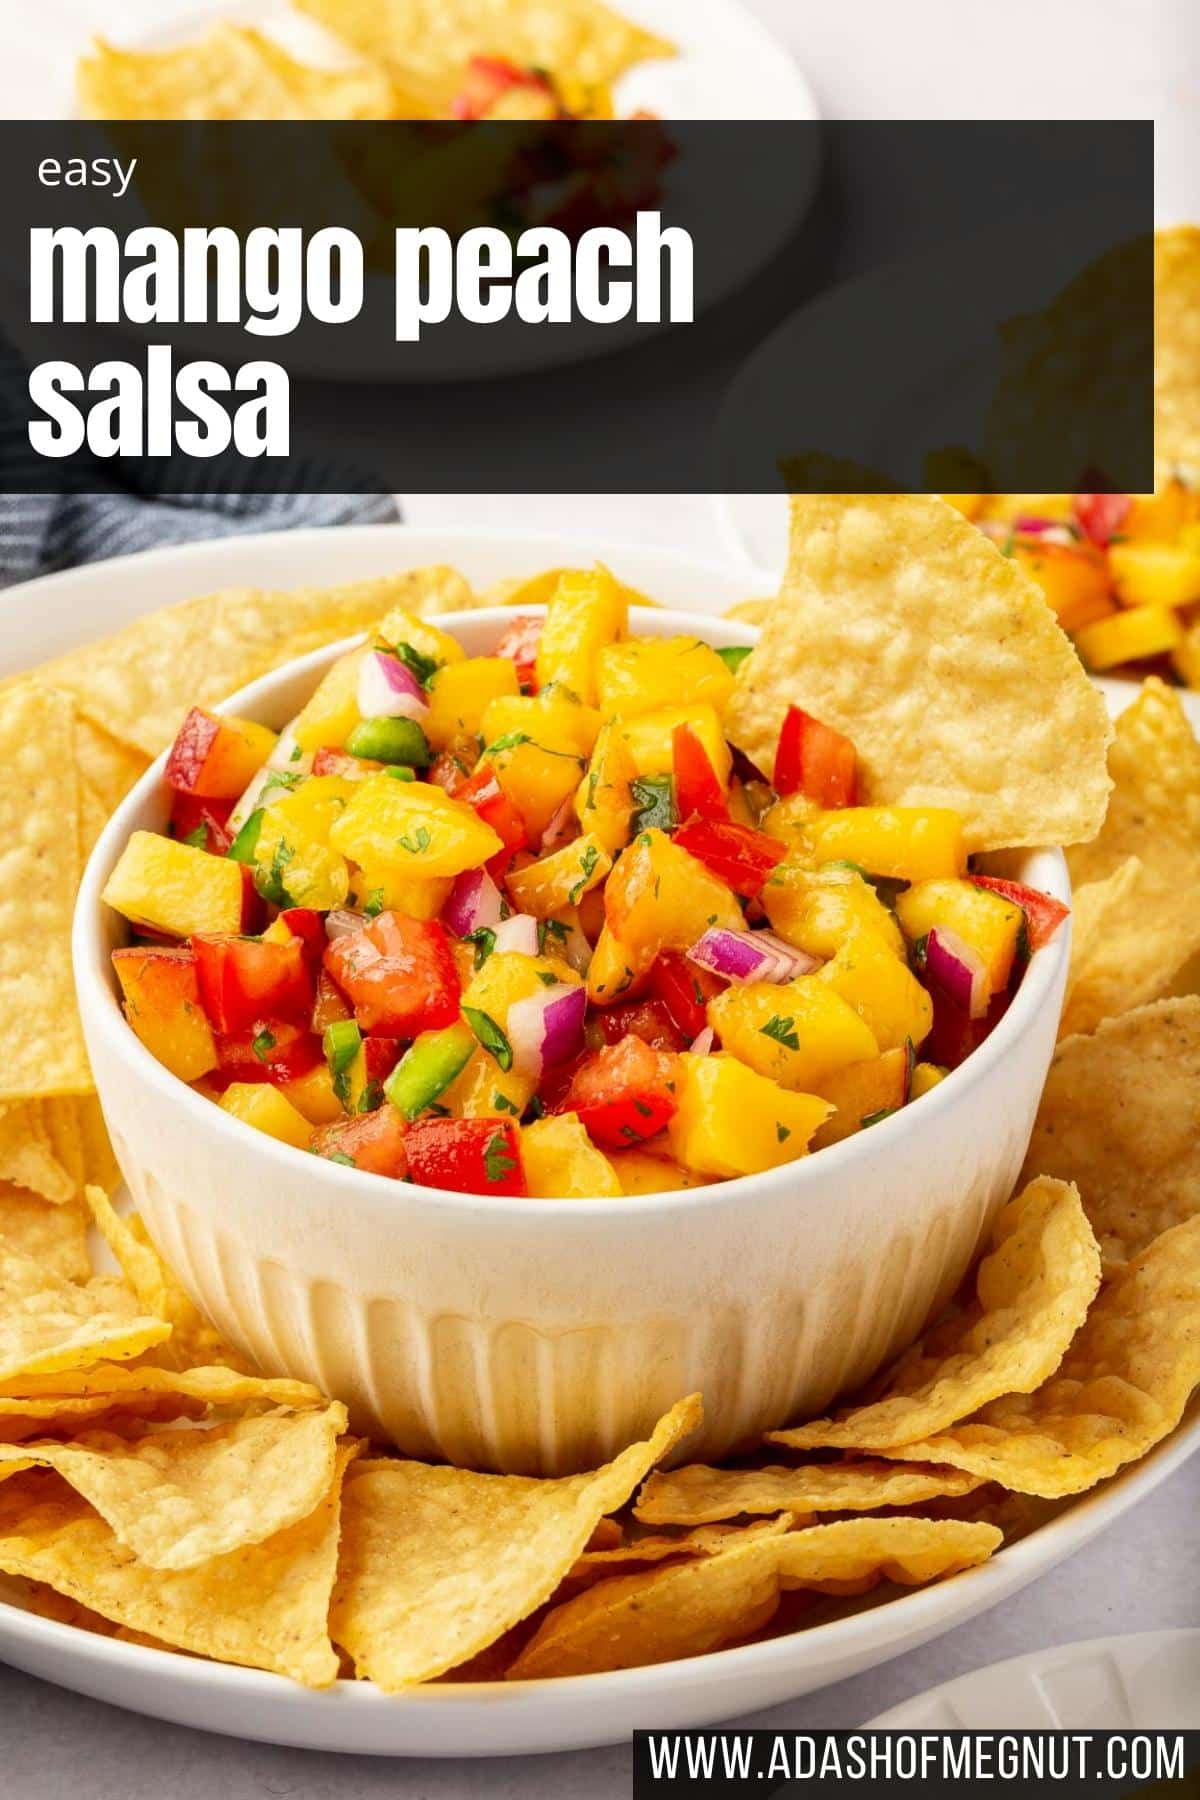 A bowl of mango peach salsa in a larger bowl of tortilla chips with appetizer plates in the background.